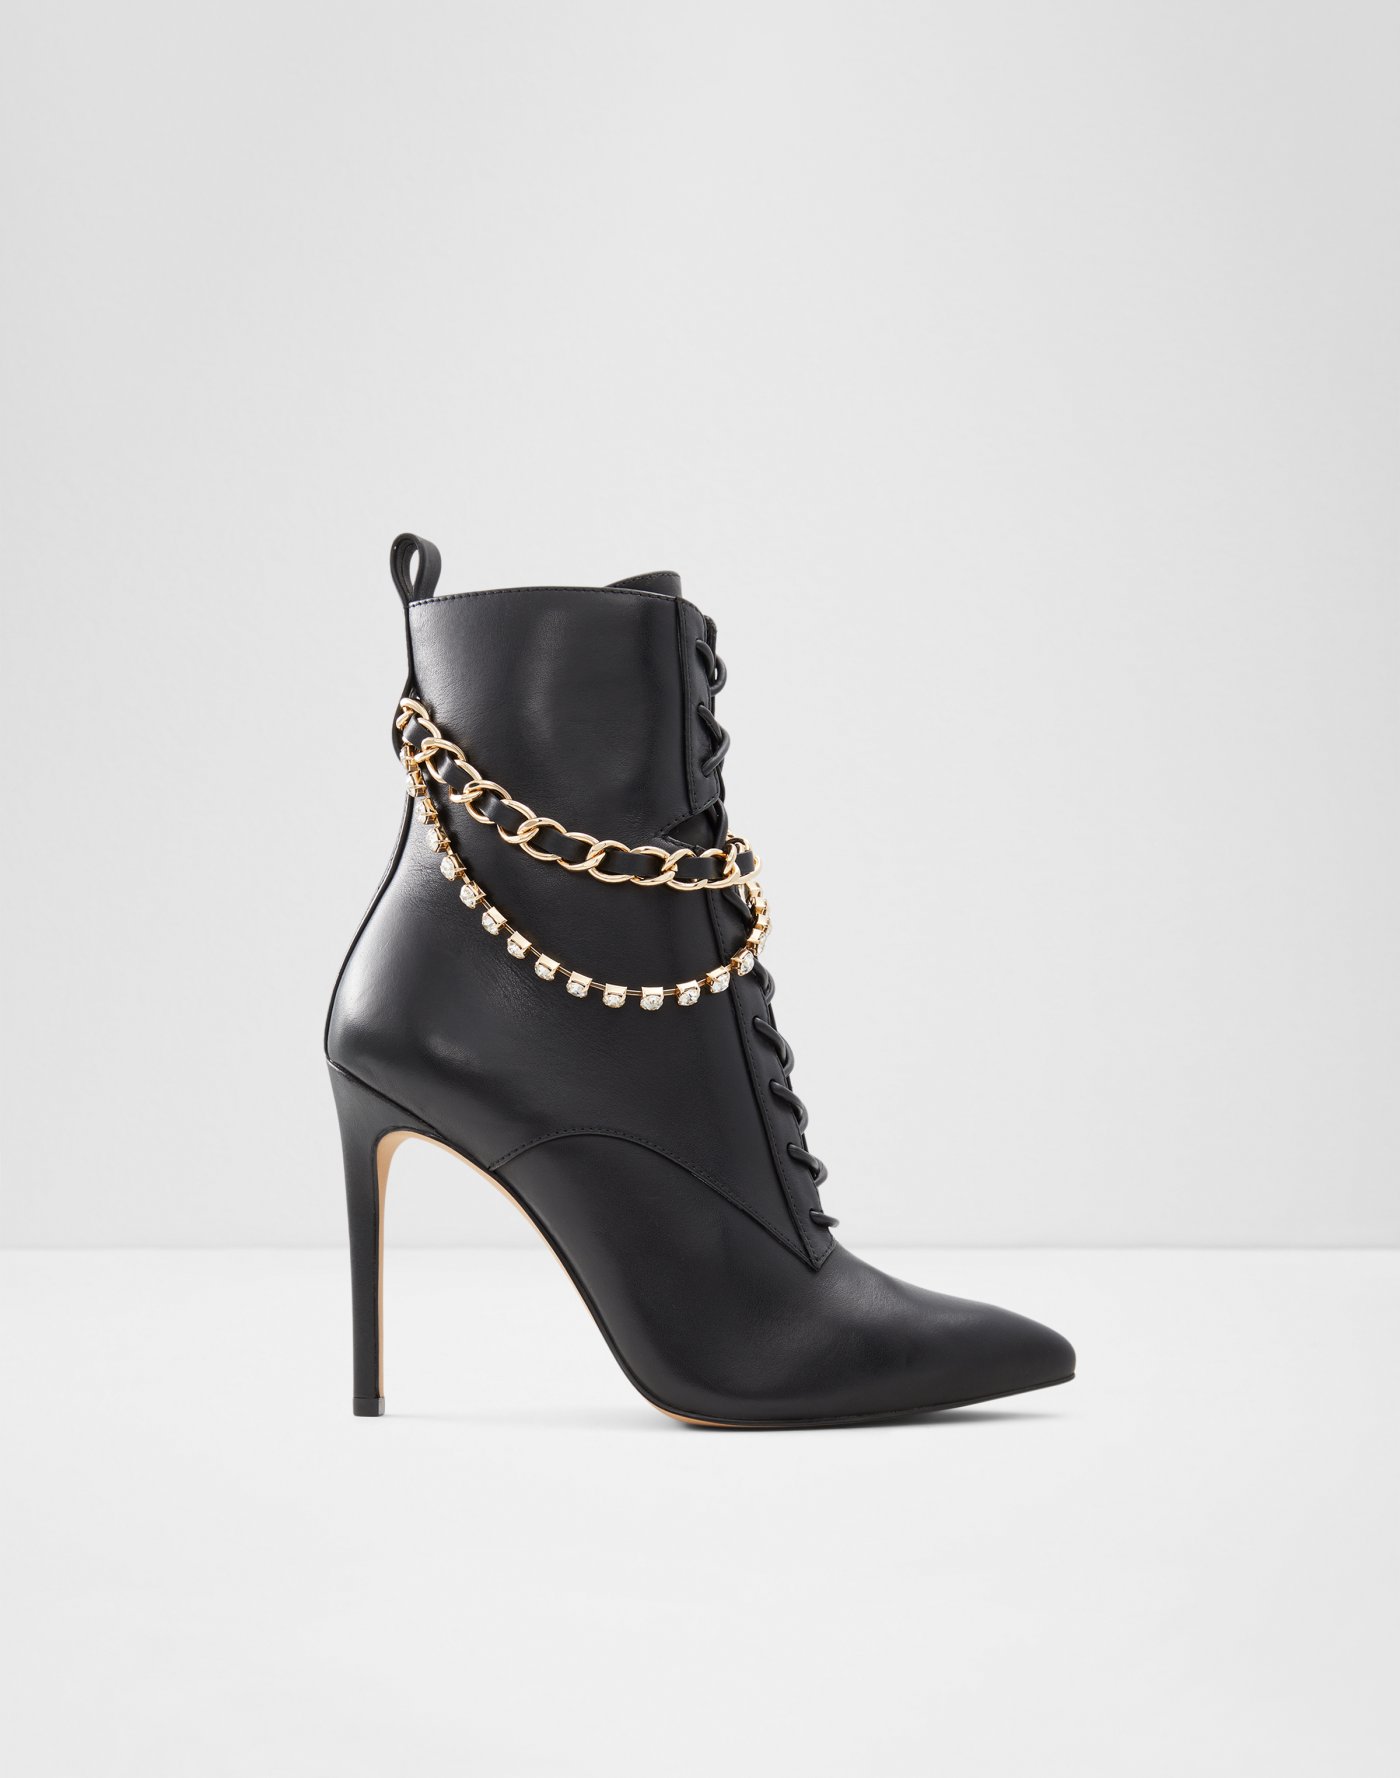 Shoes, Sneakers, Boots, Handbags & Accessories | US